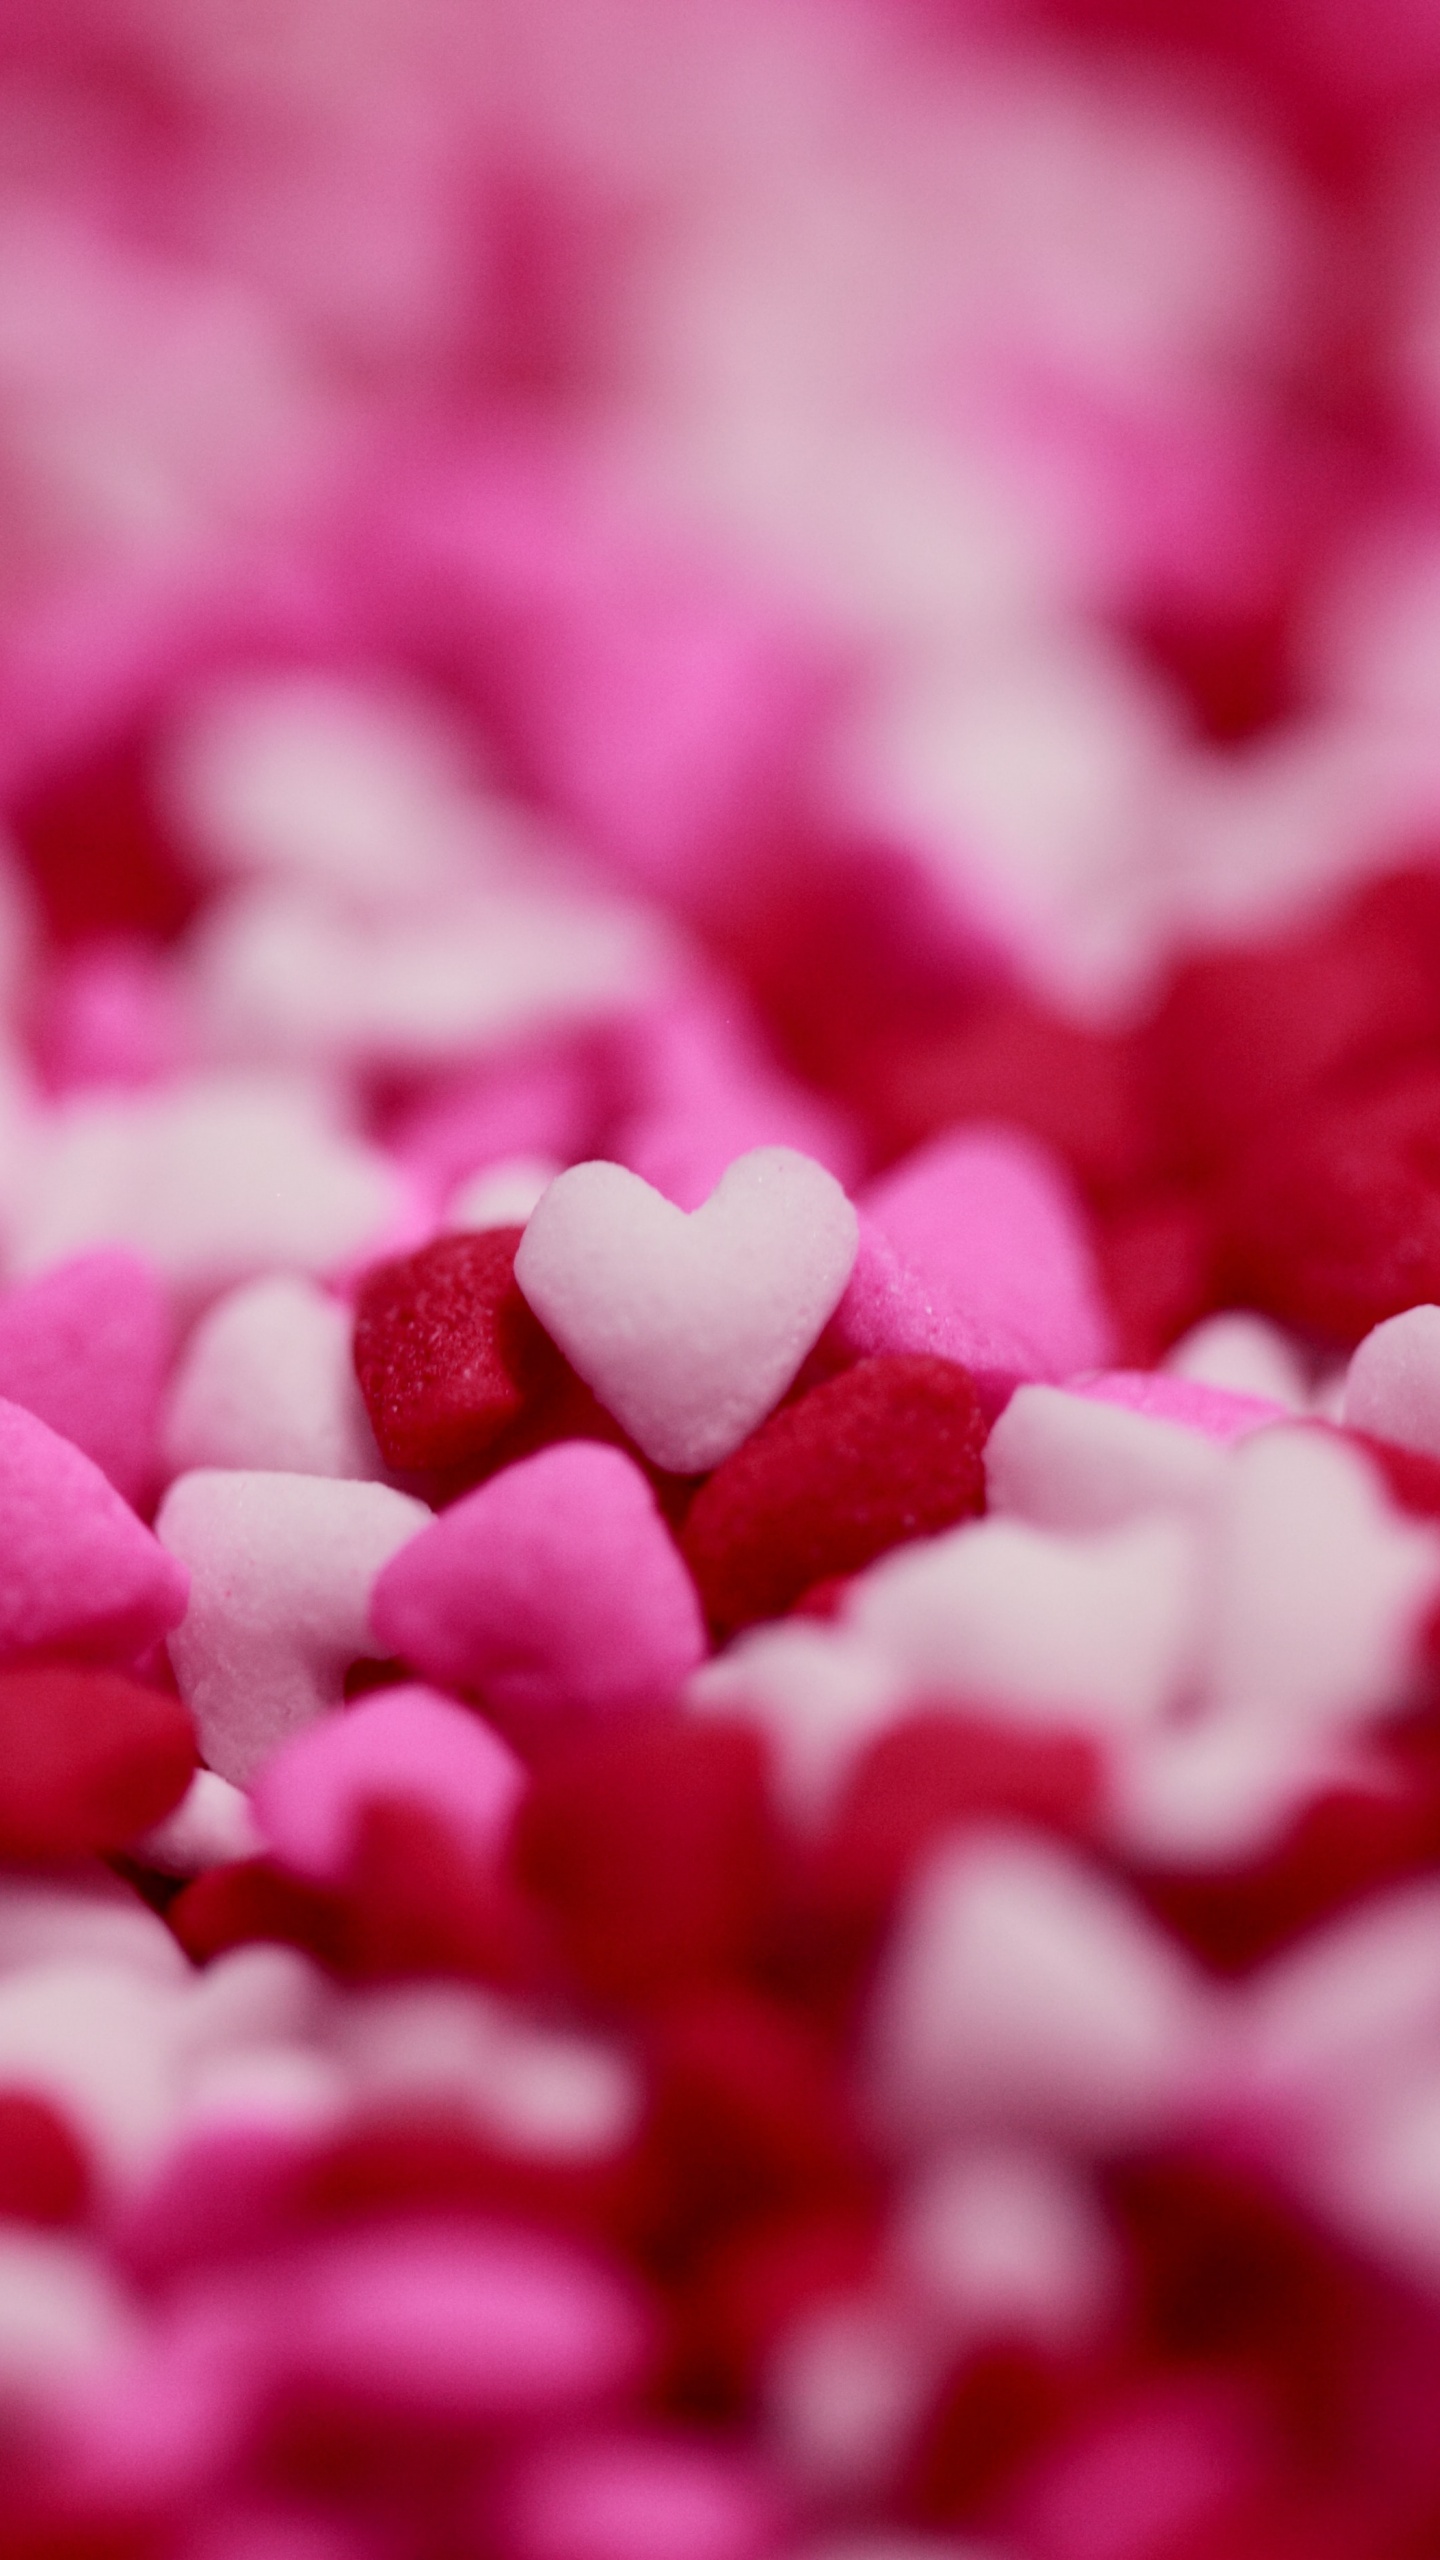 Love hearts Wallpaper 4K, Pink, Red, Candies, Photography, #1535